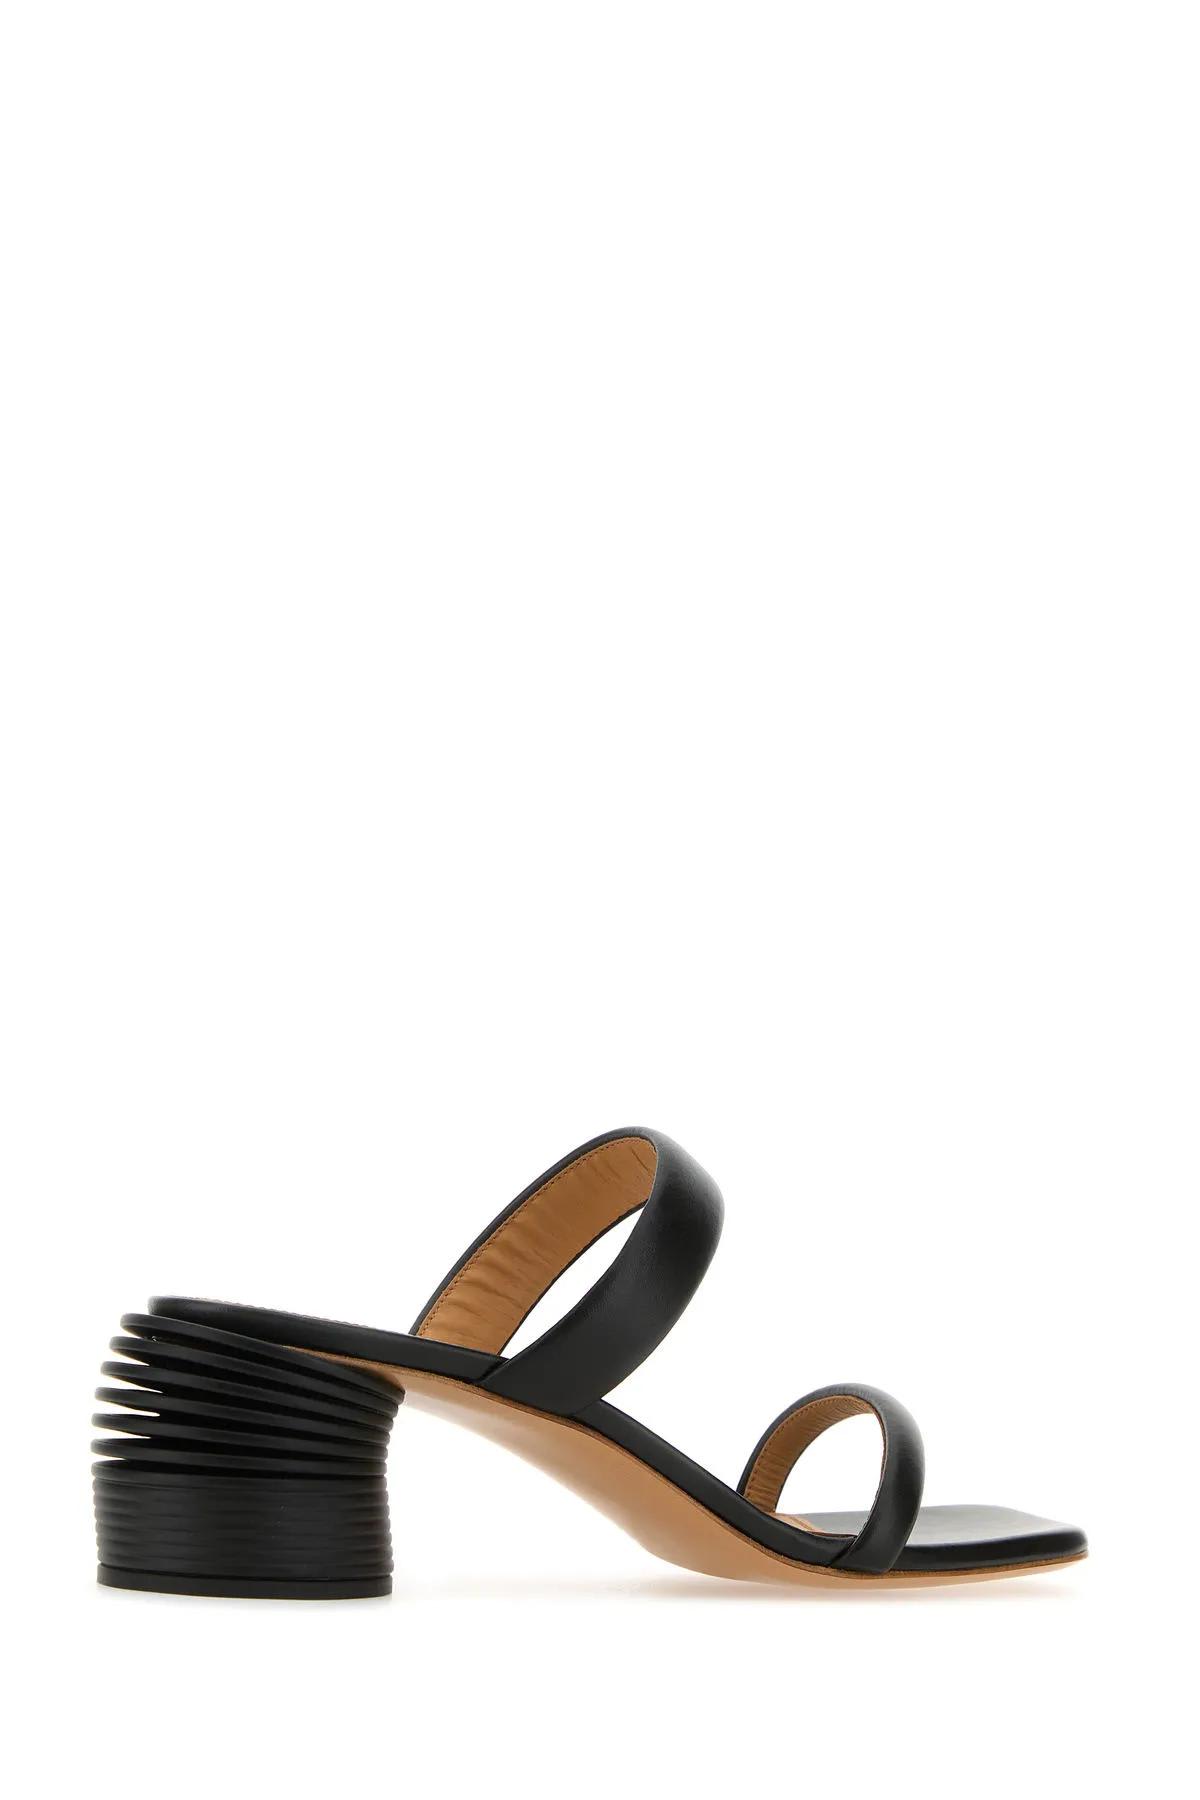 Shop Off-white Black Leather Spring Mules